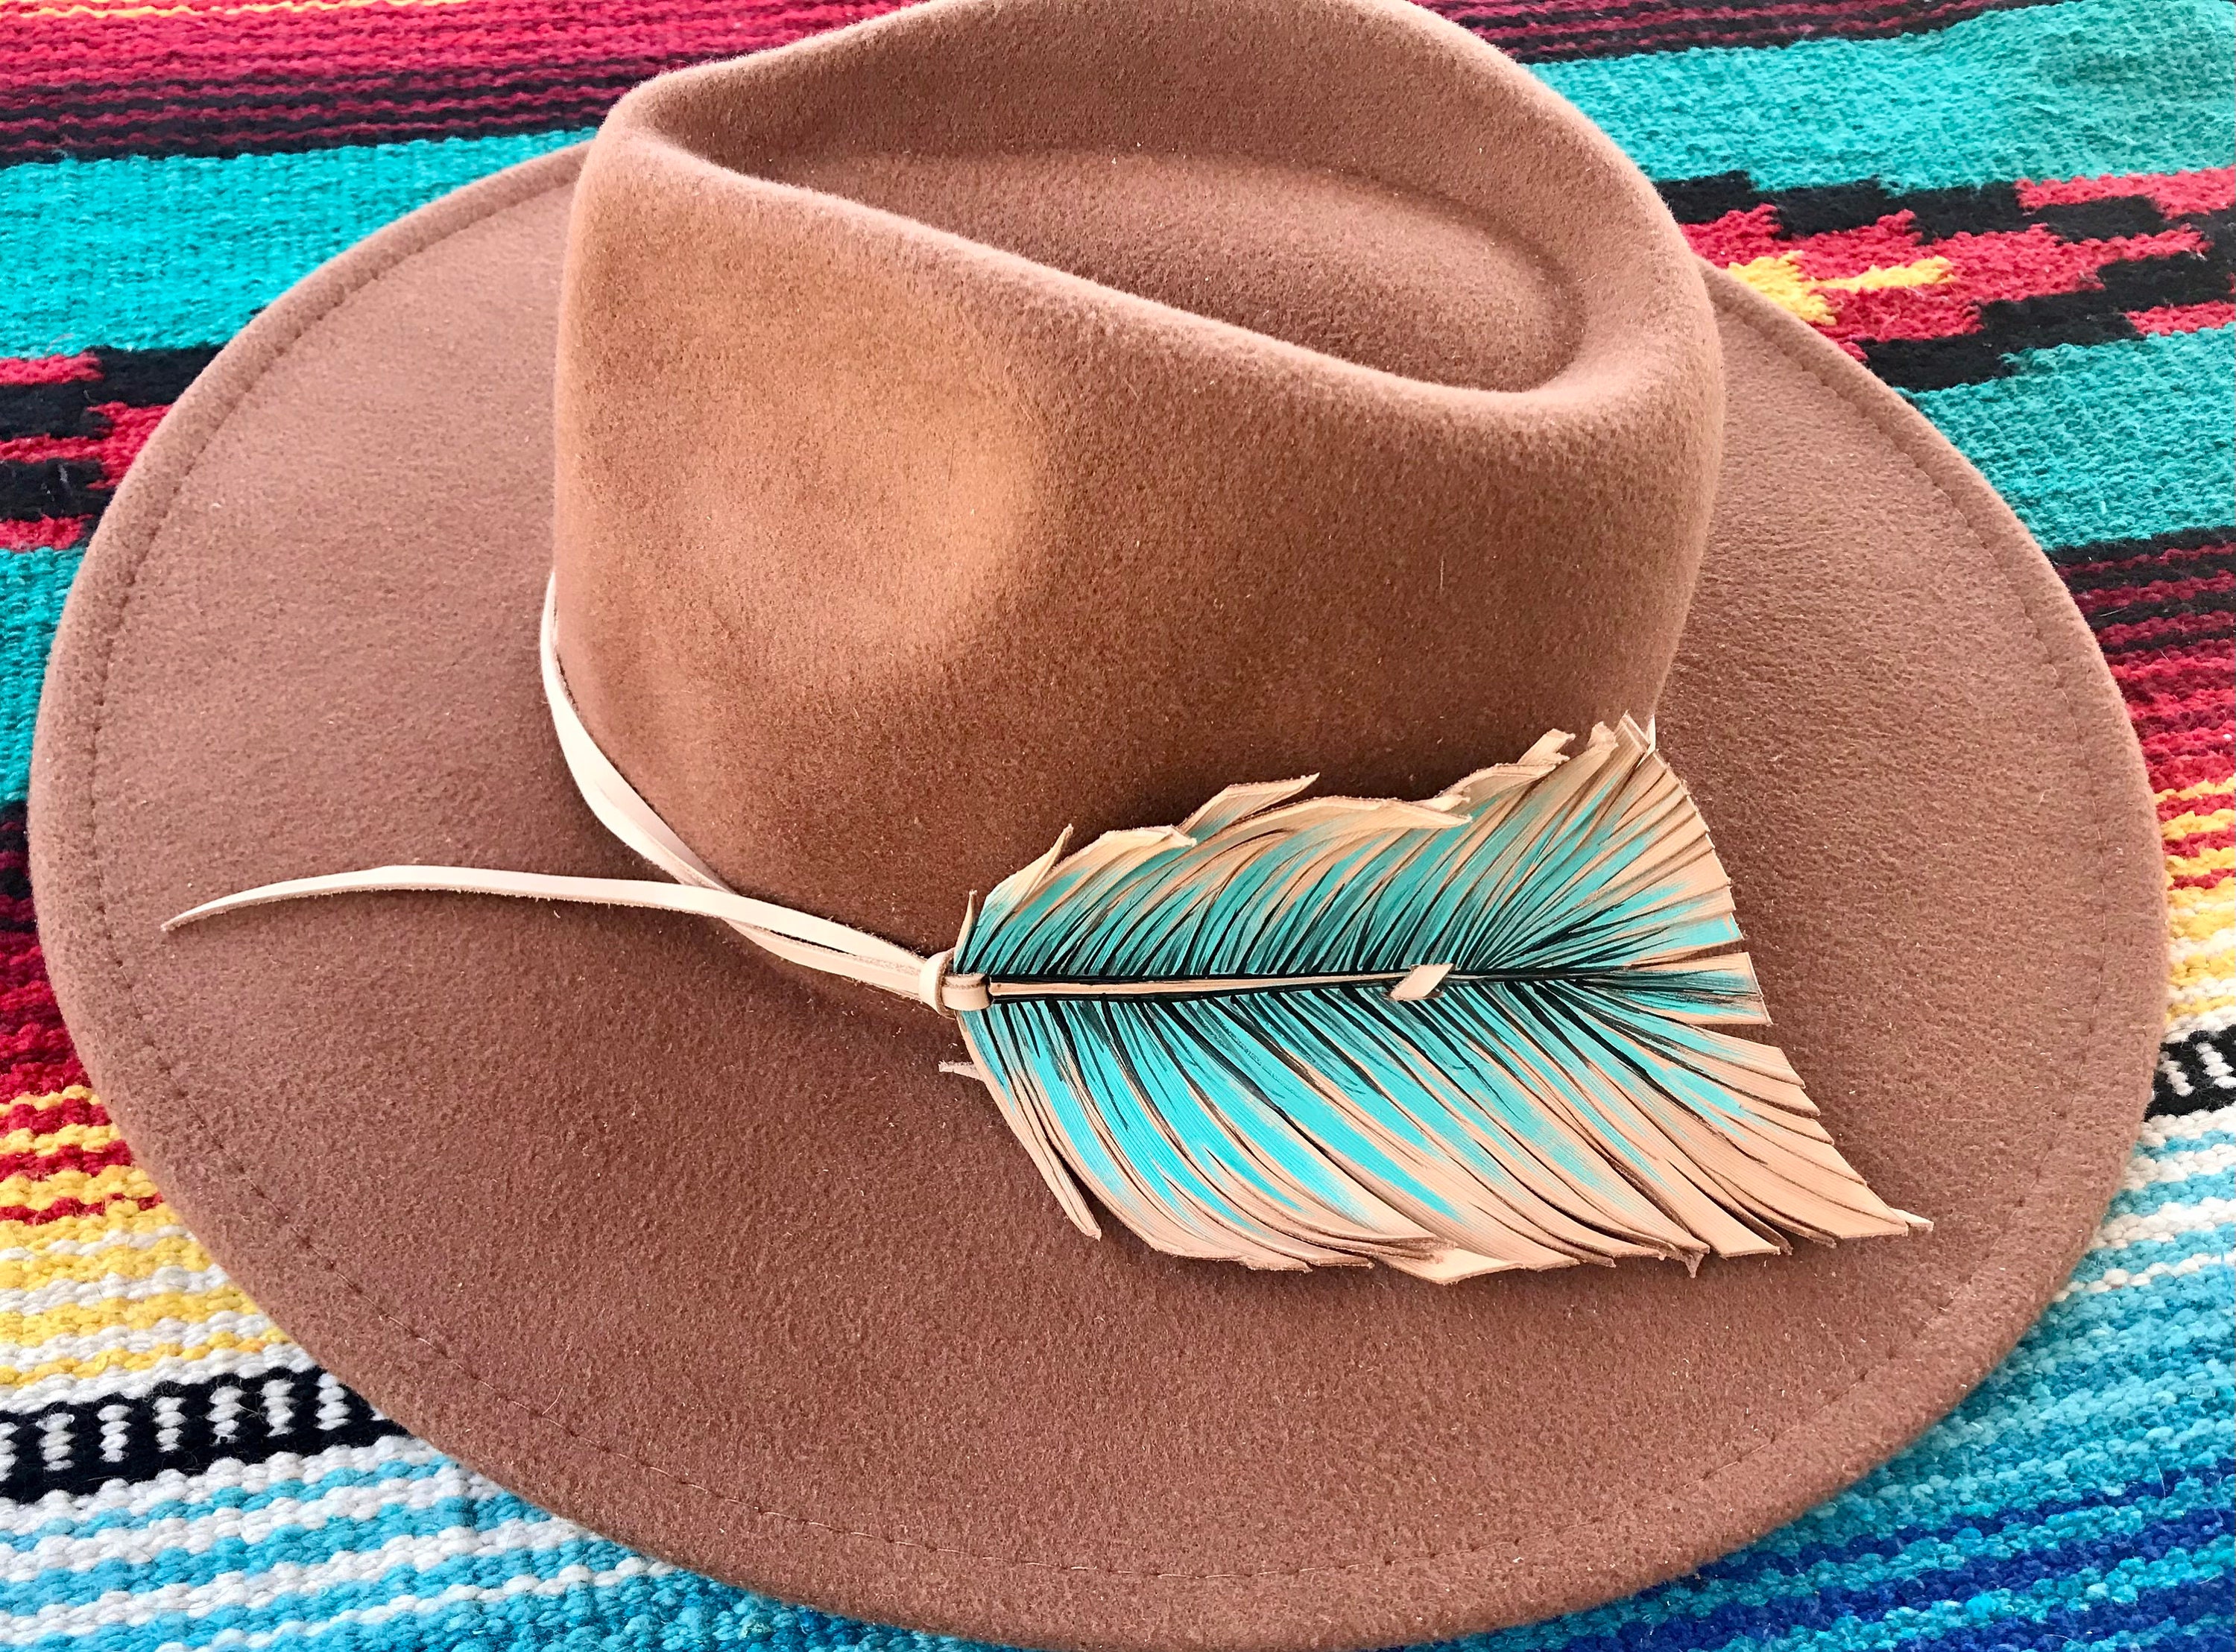 Jubilee Feather | Hat Band Accessory by American Hat Makers